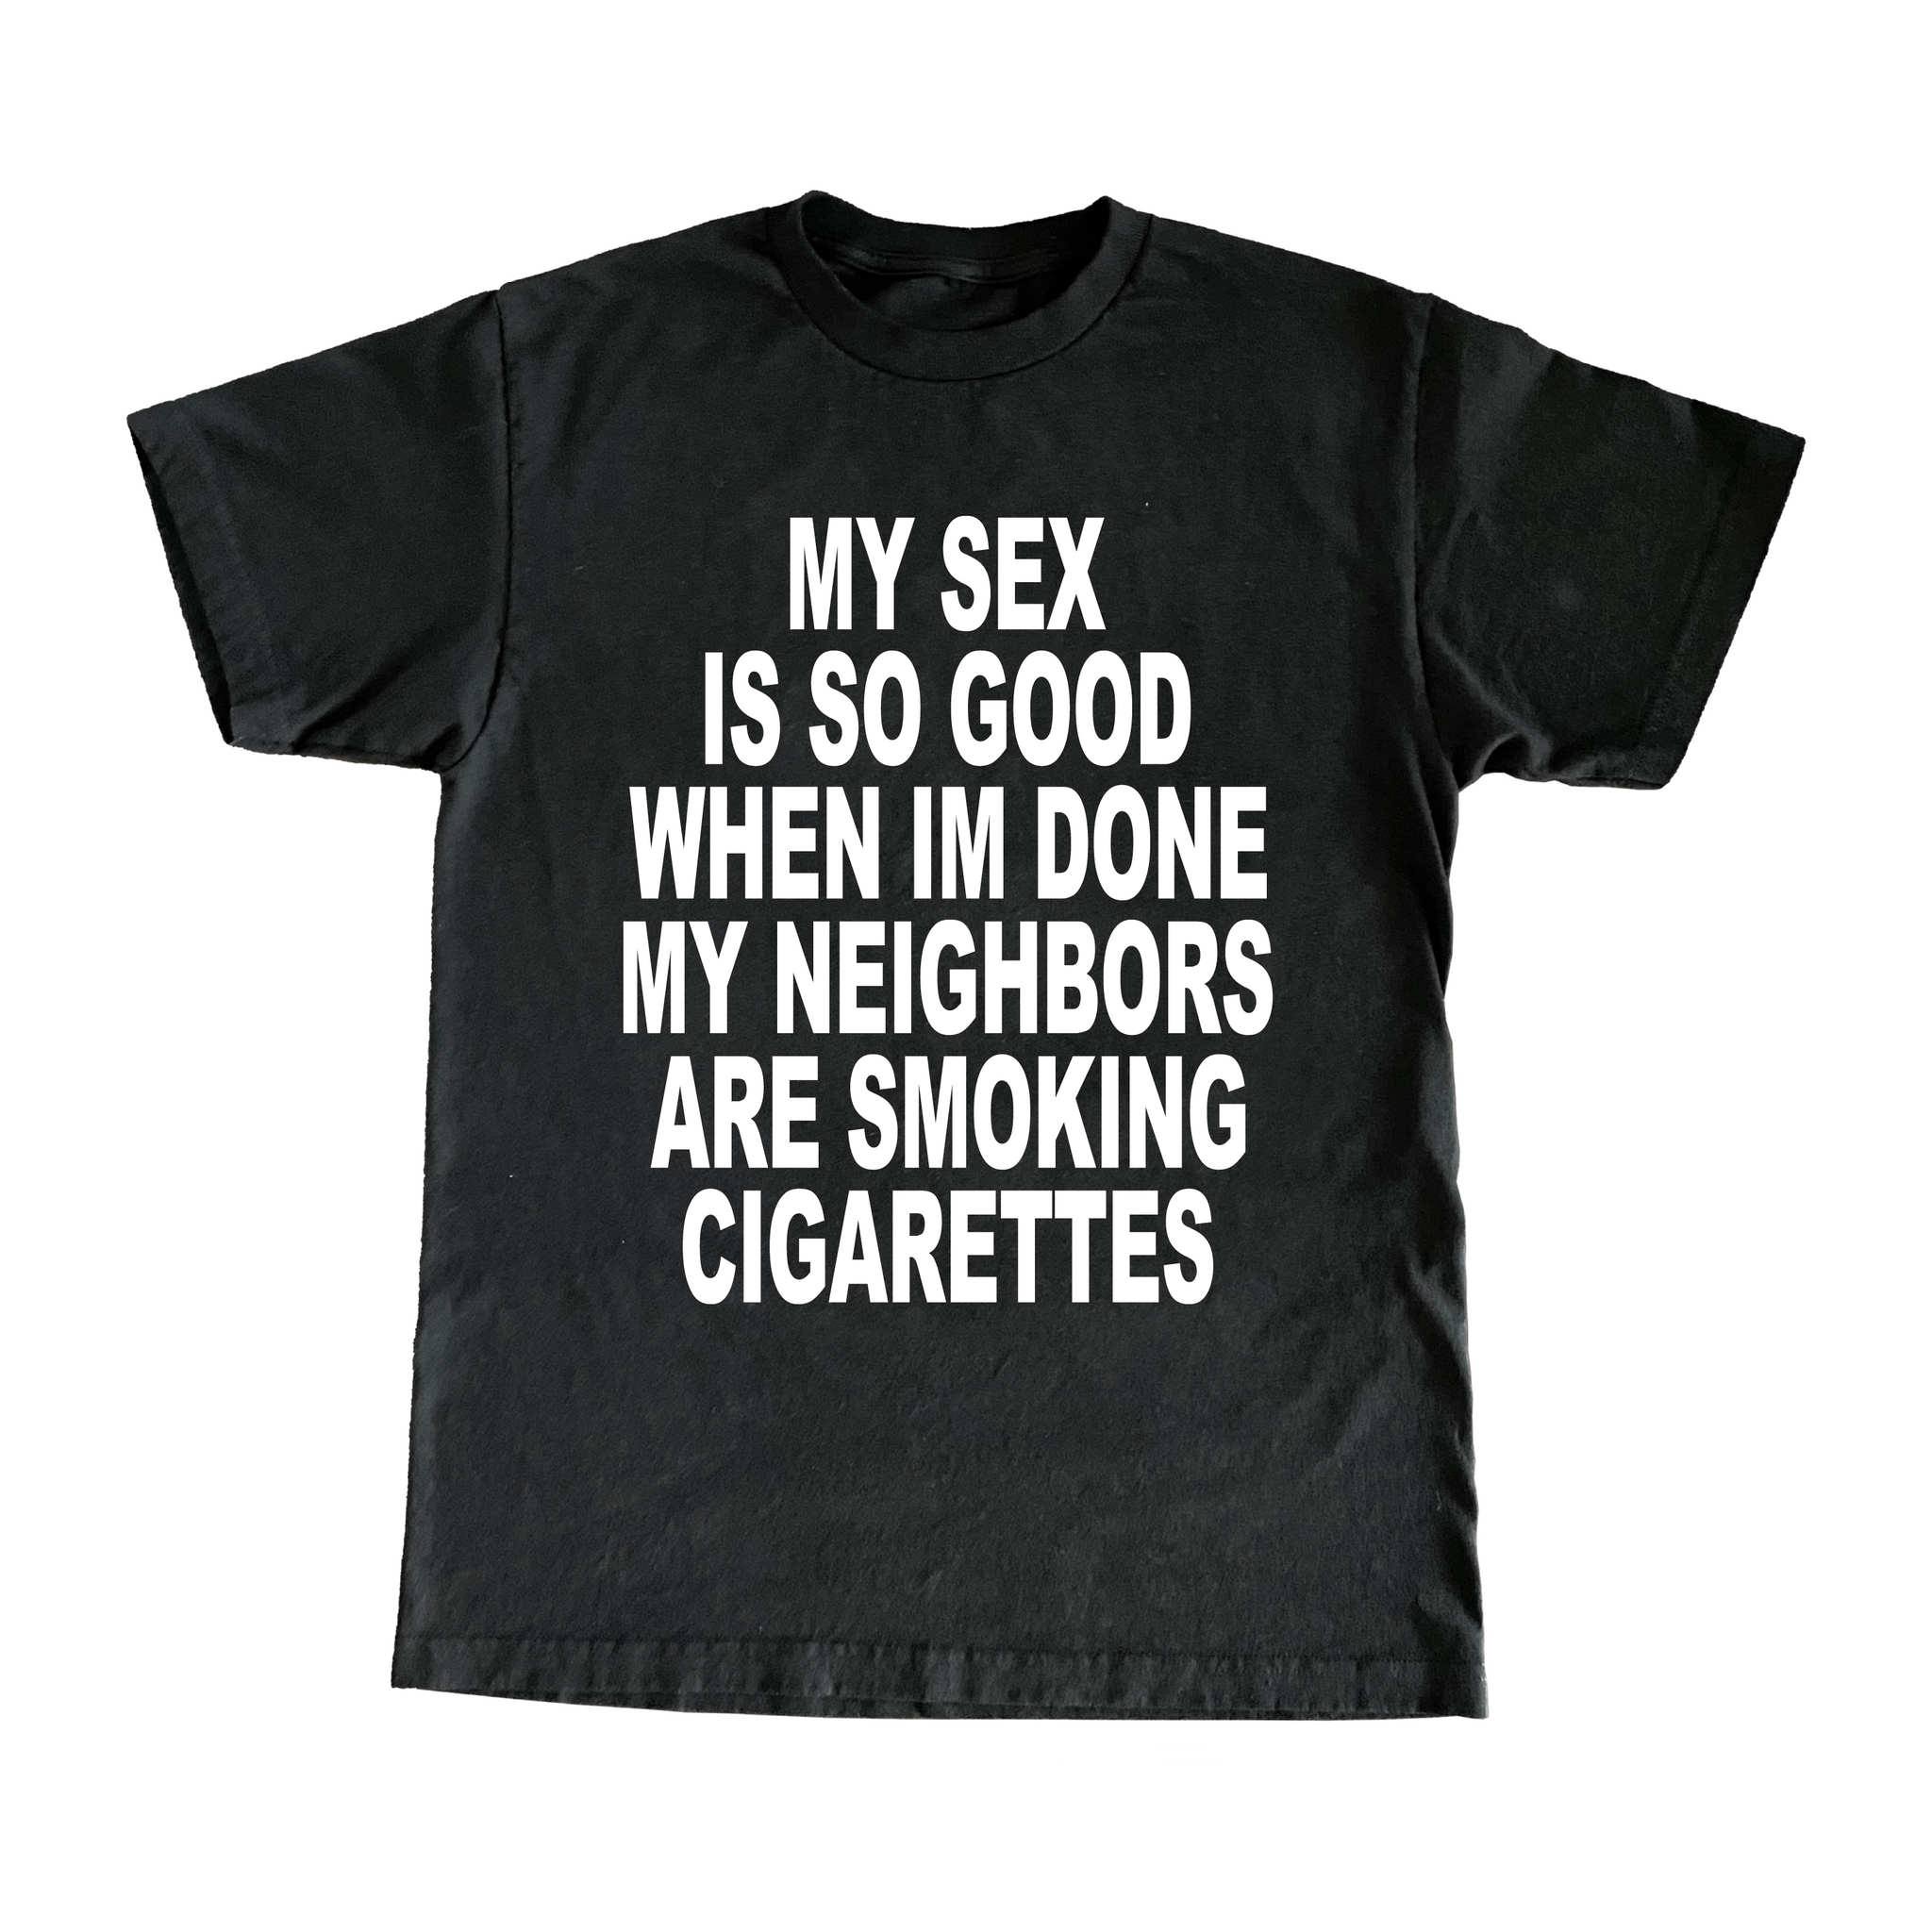 My Sex Is So Good When Im Done My Neighbors Are Smoking Cigarettes